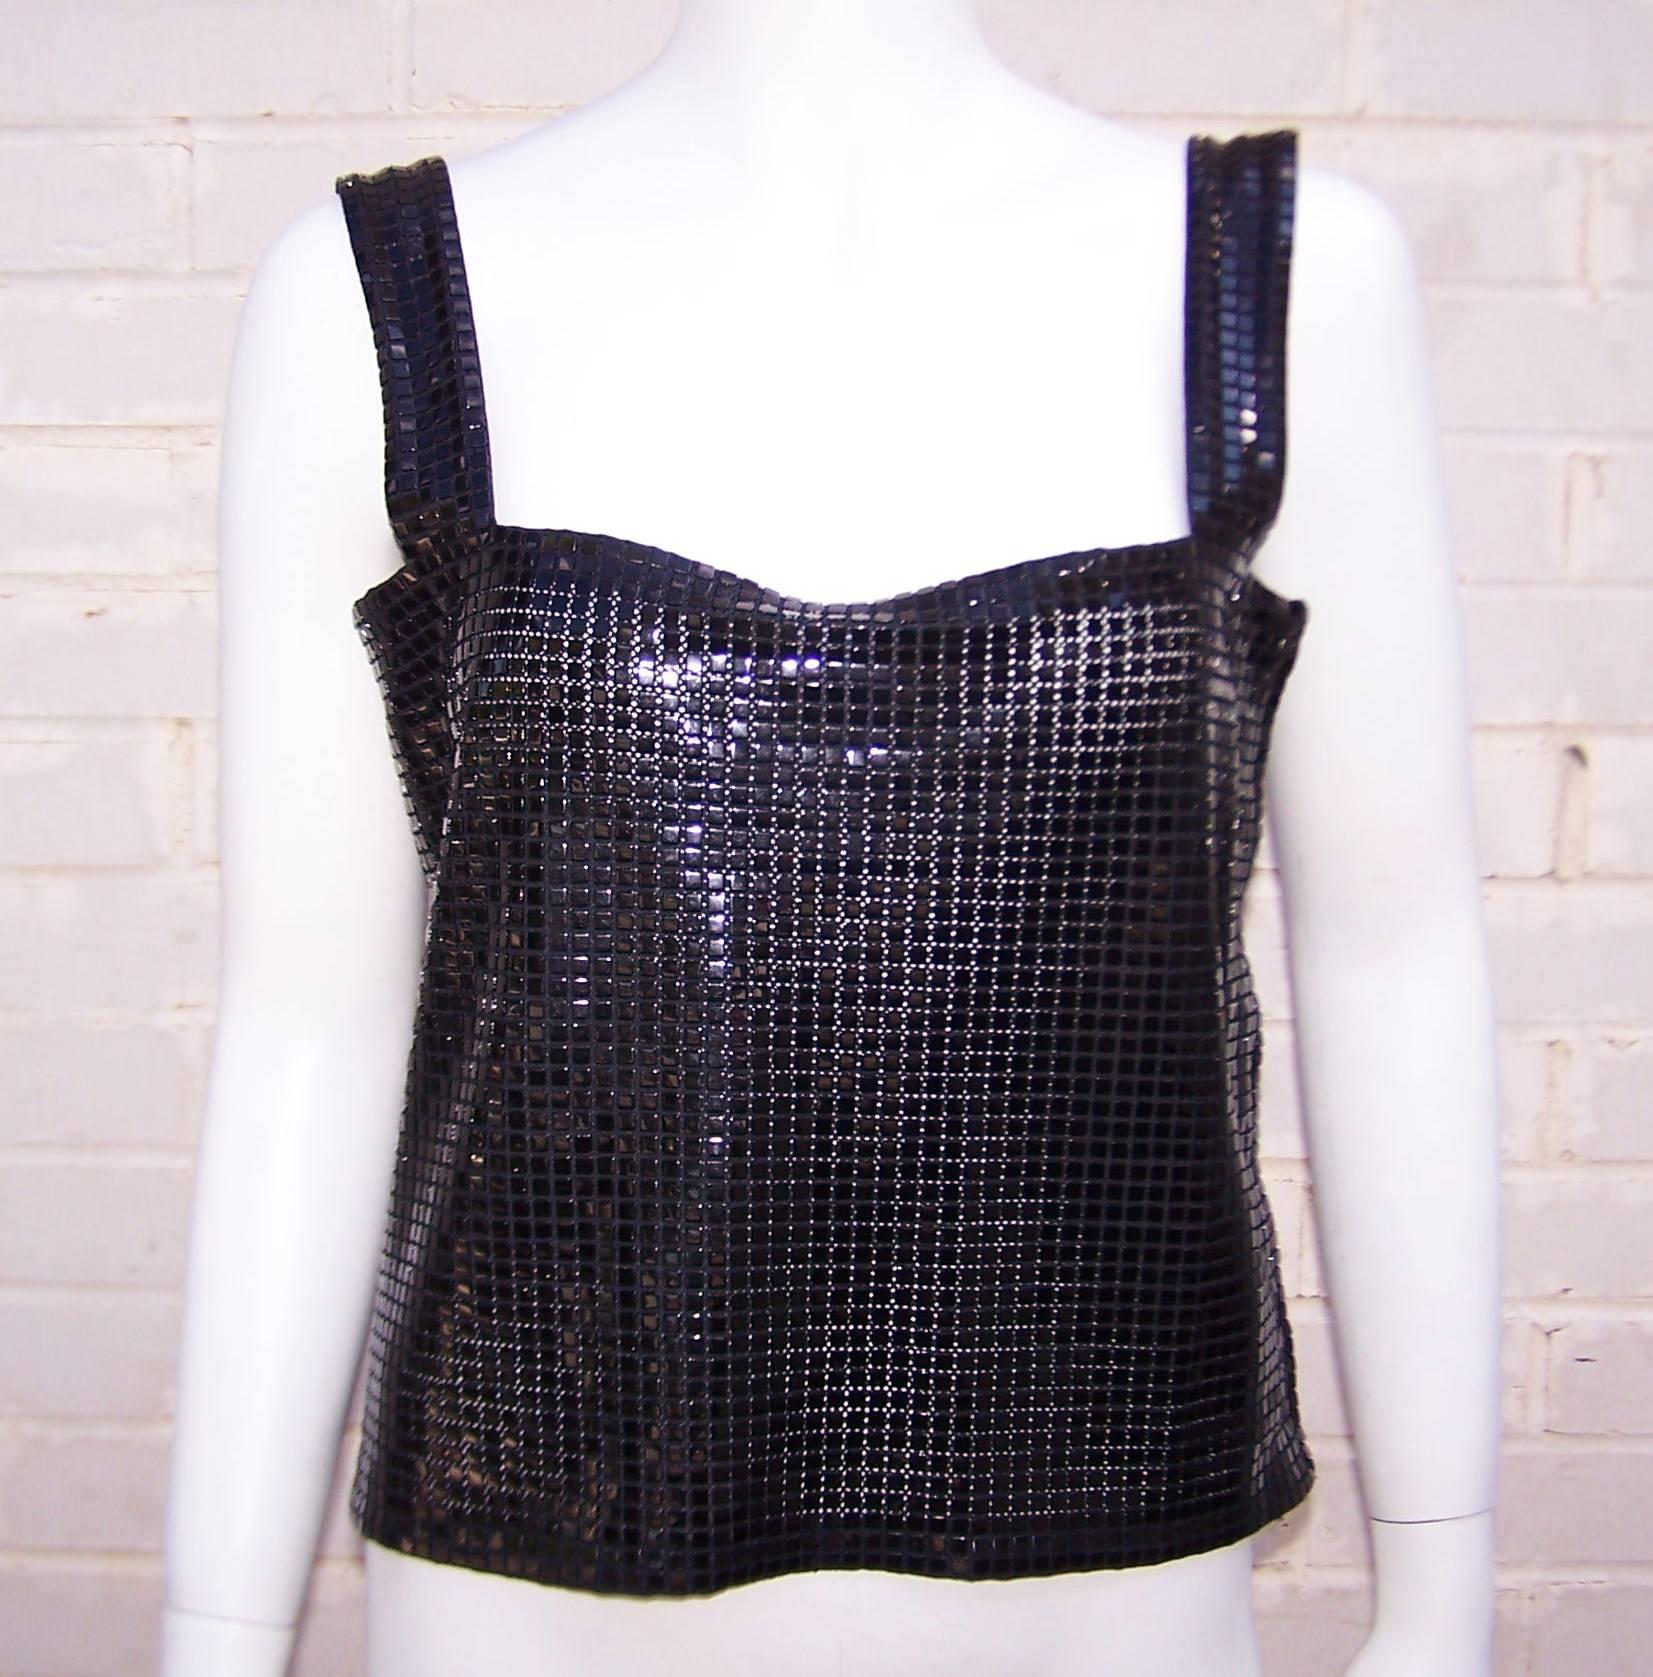 Fashion forward yet reminiscent of the 1960's mesh styles of Paco Rabanne, this Krizia space age black top can function as the centerpiece to an outfit or a functional shell to add under a jacket or wrap.  The top is a cotton backed fabric with